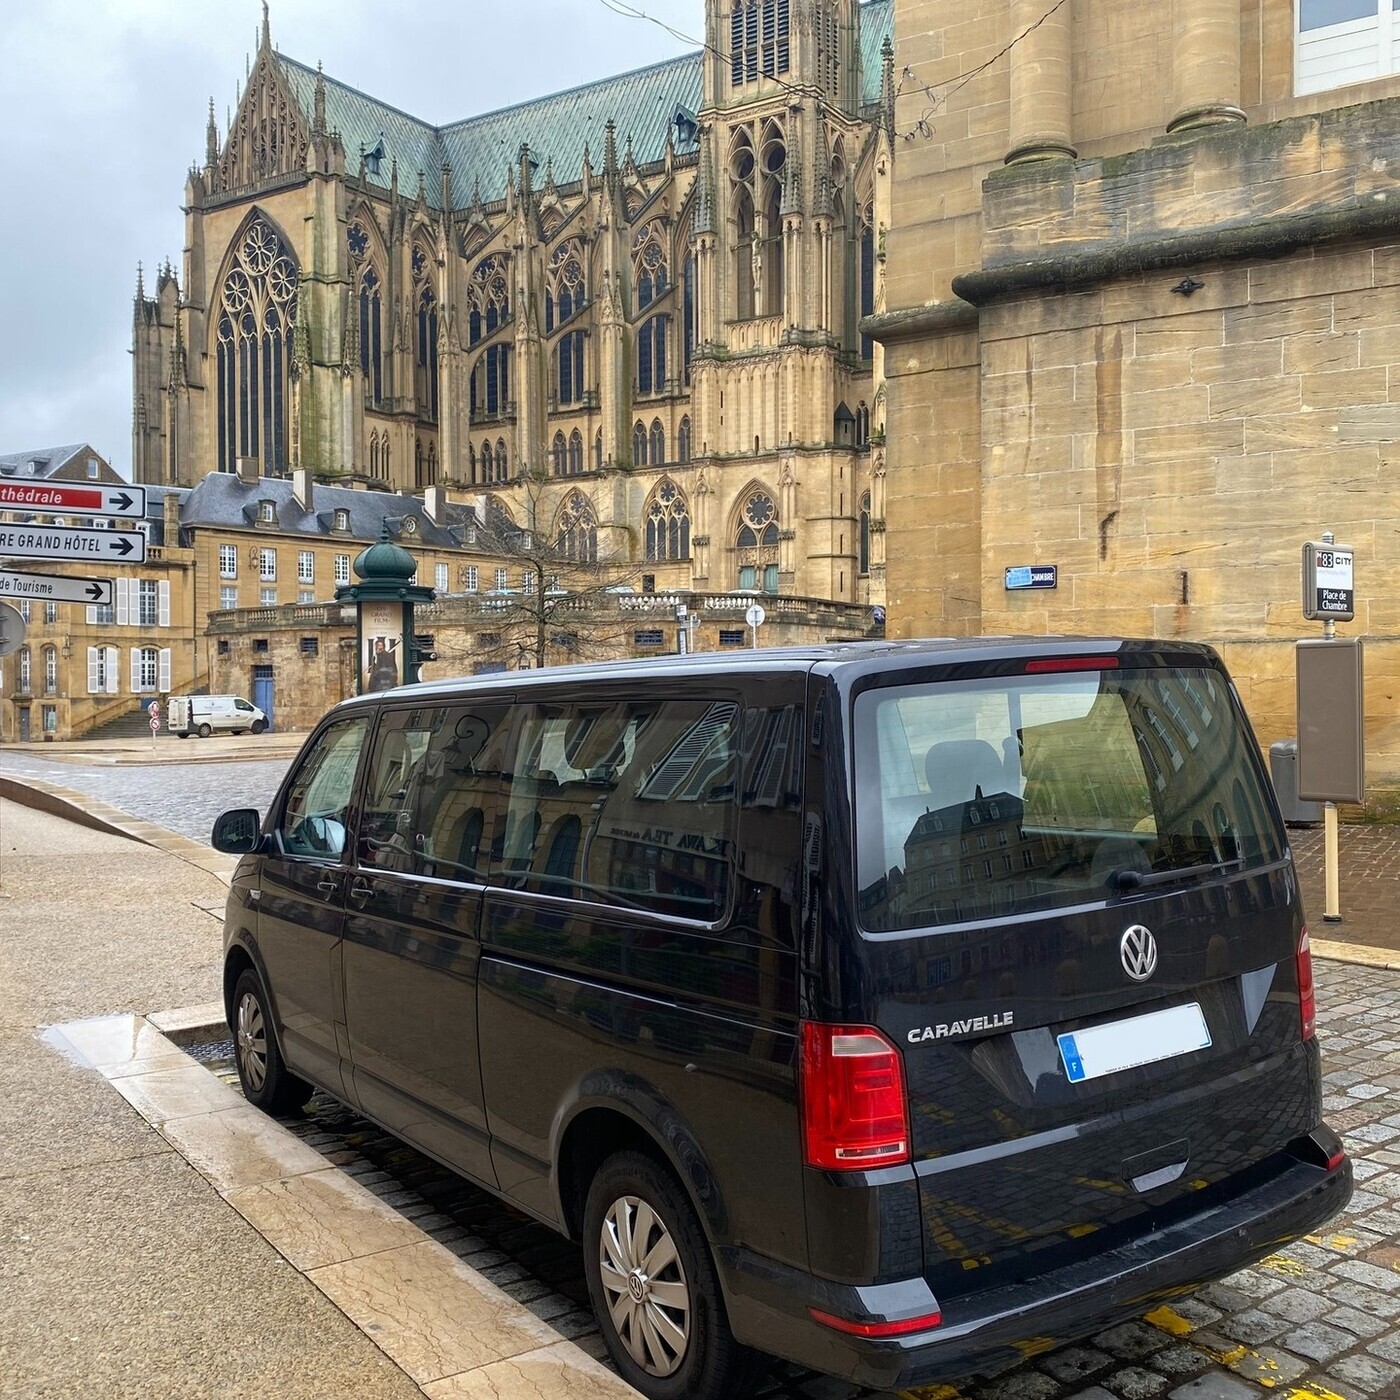 8Rental is a premier provider of group transportation services, offering reliable and comfortable car and bus rentals for travelers across Europe and beyond